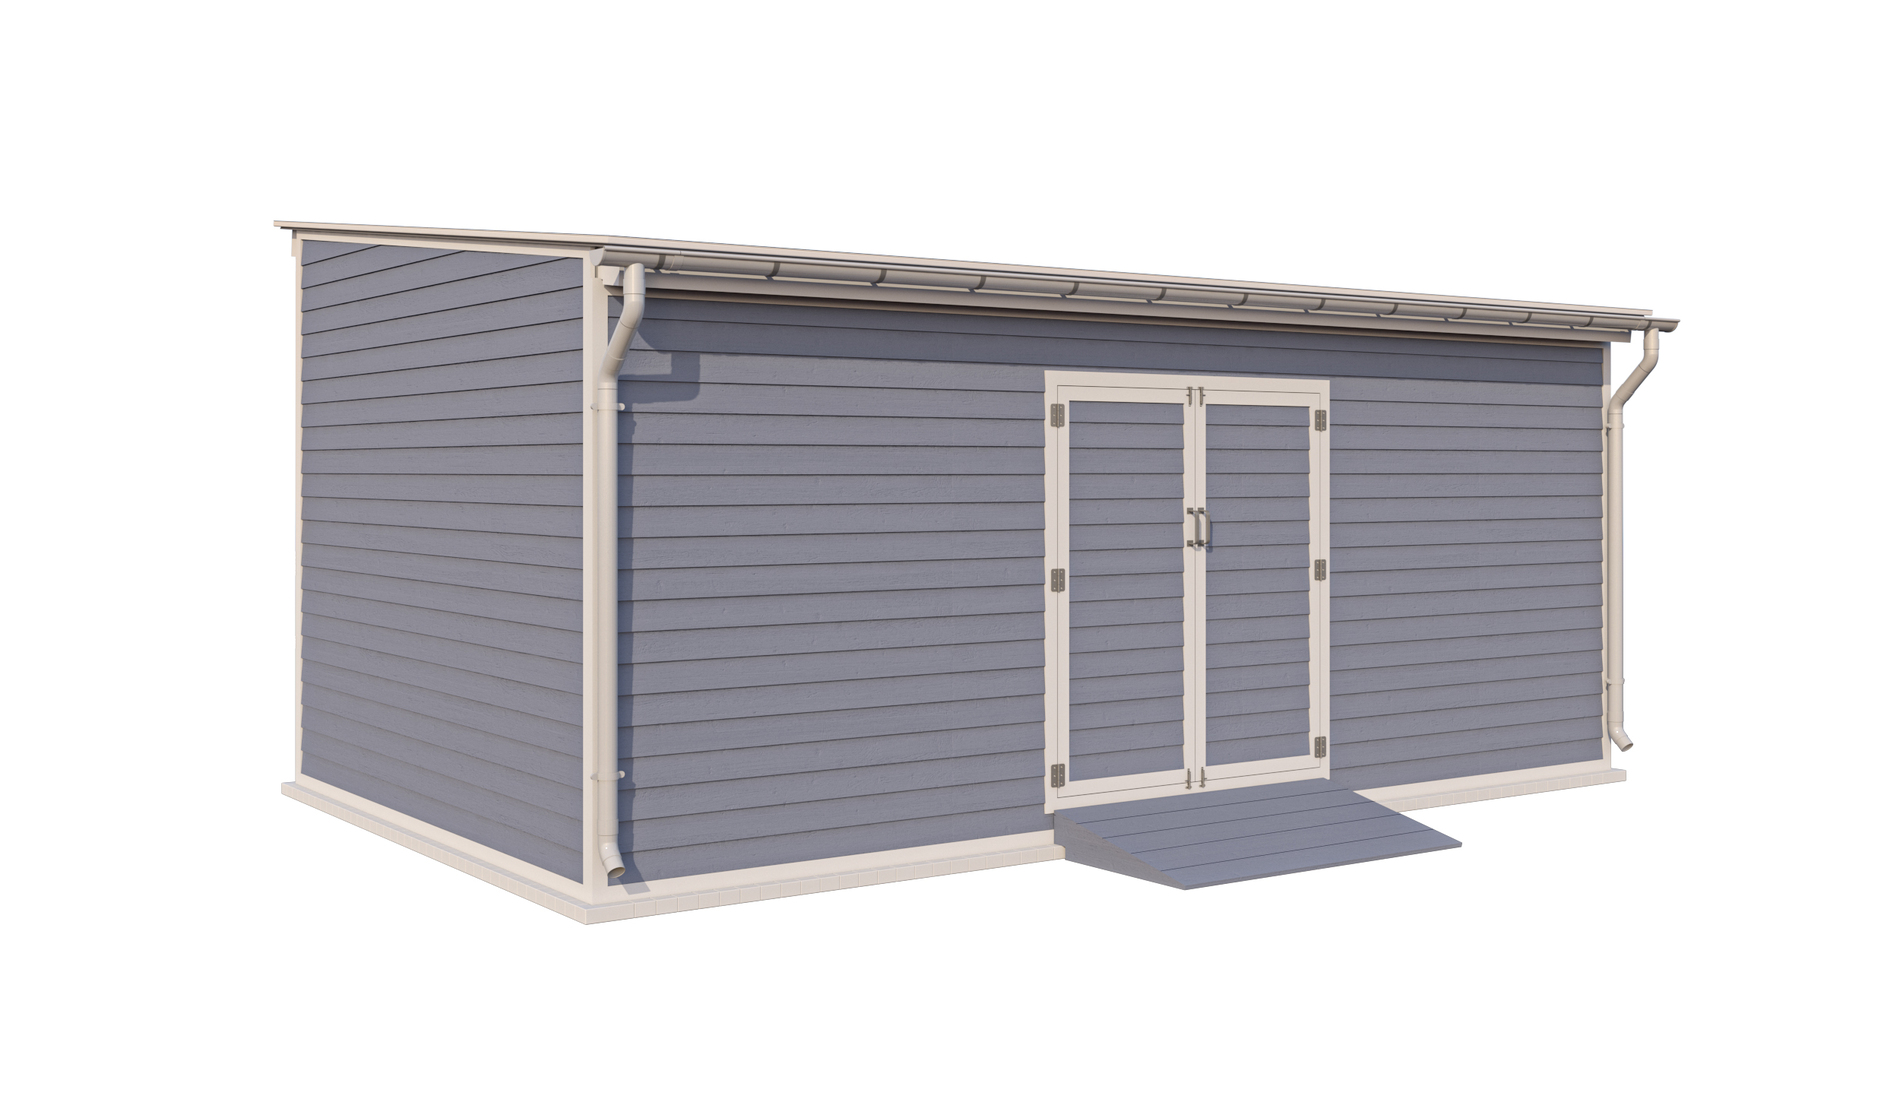 12x20 lean to storage shed